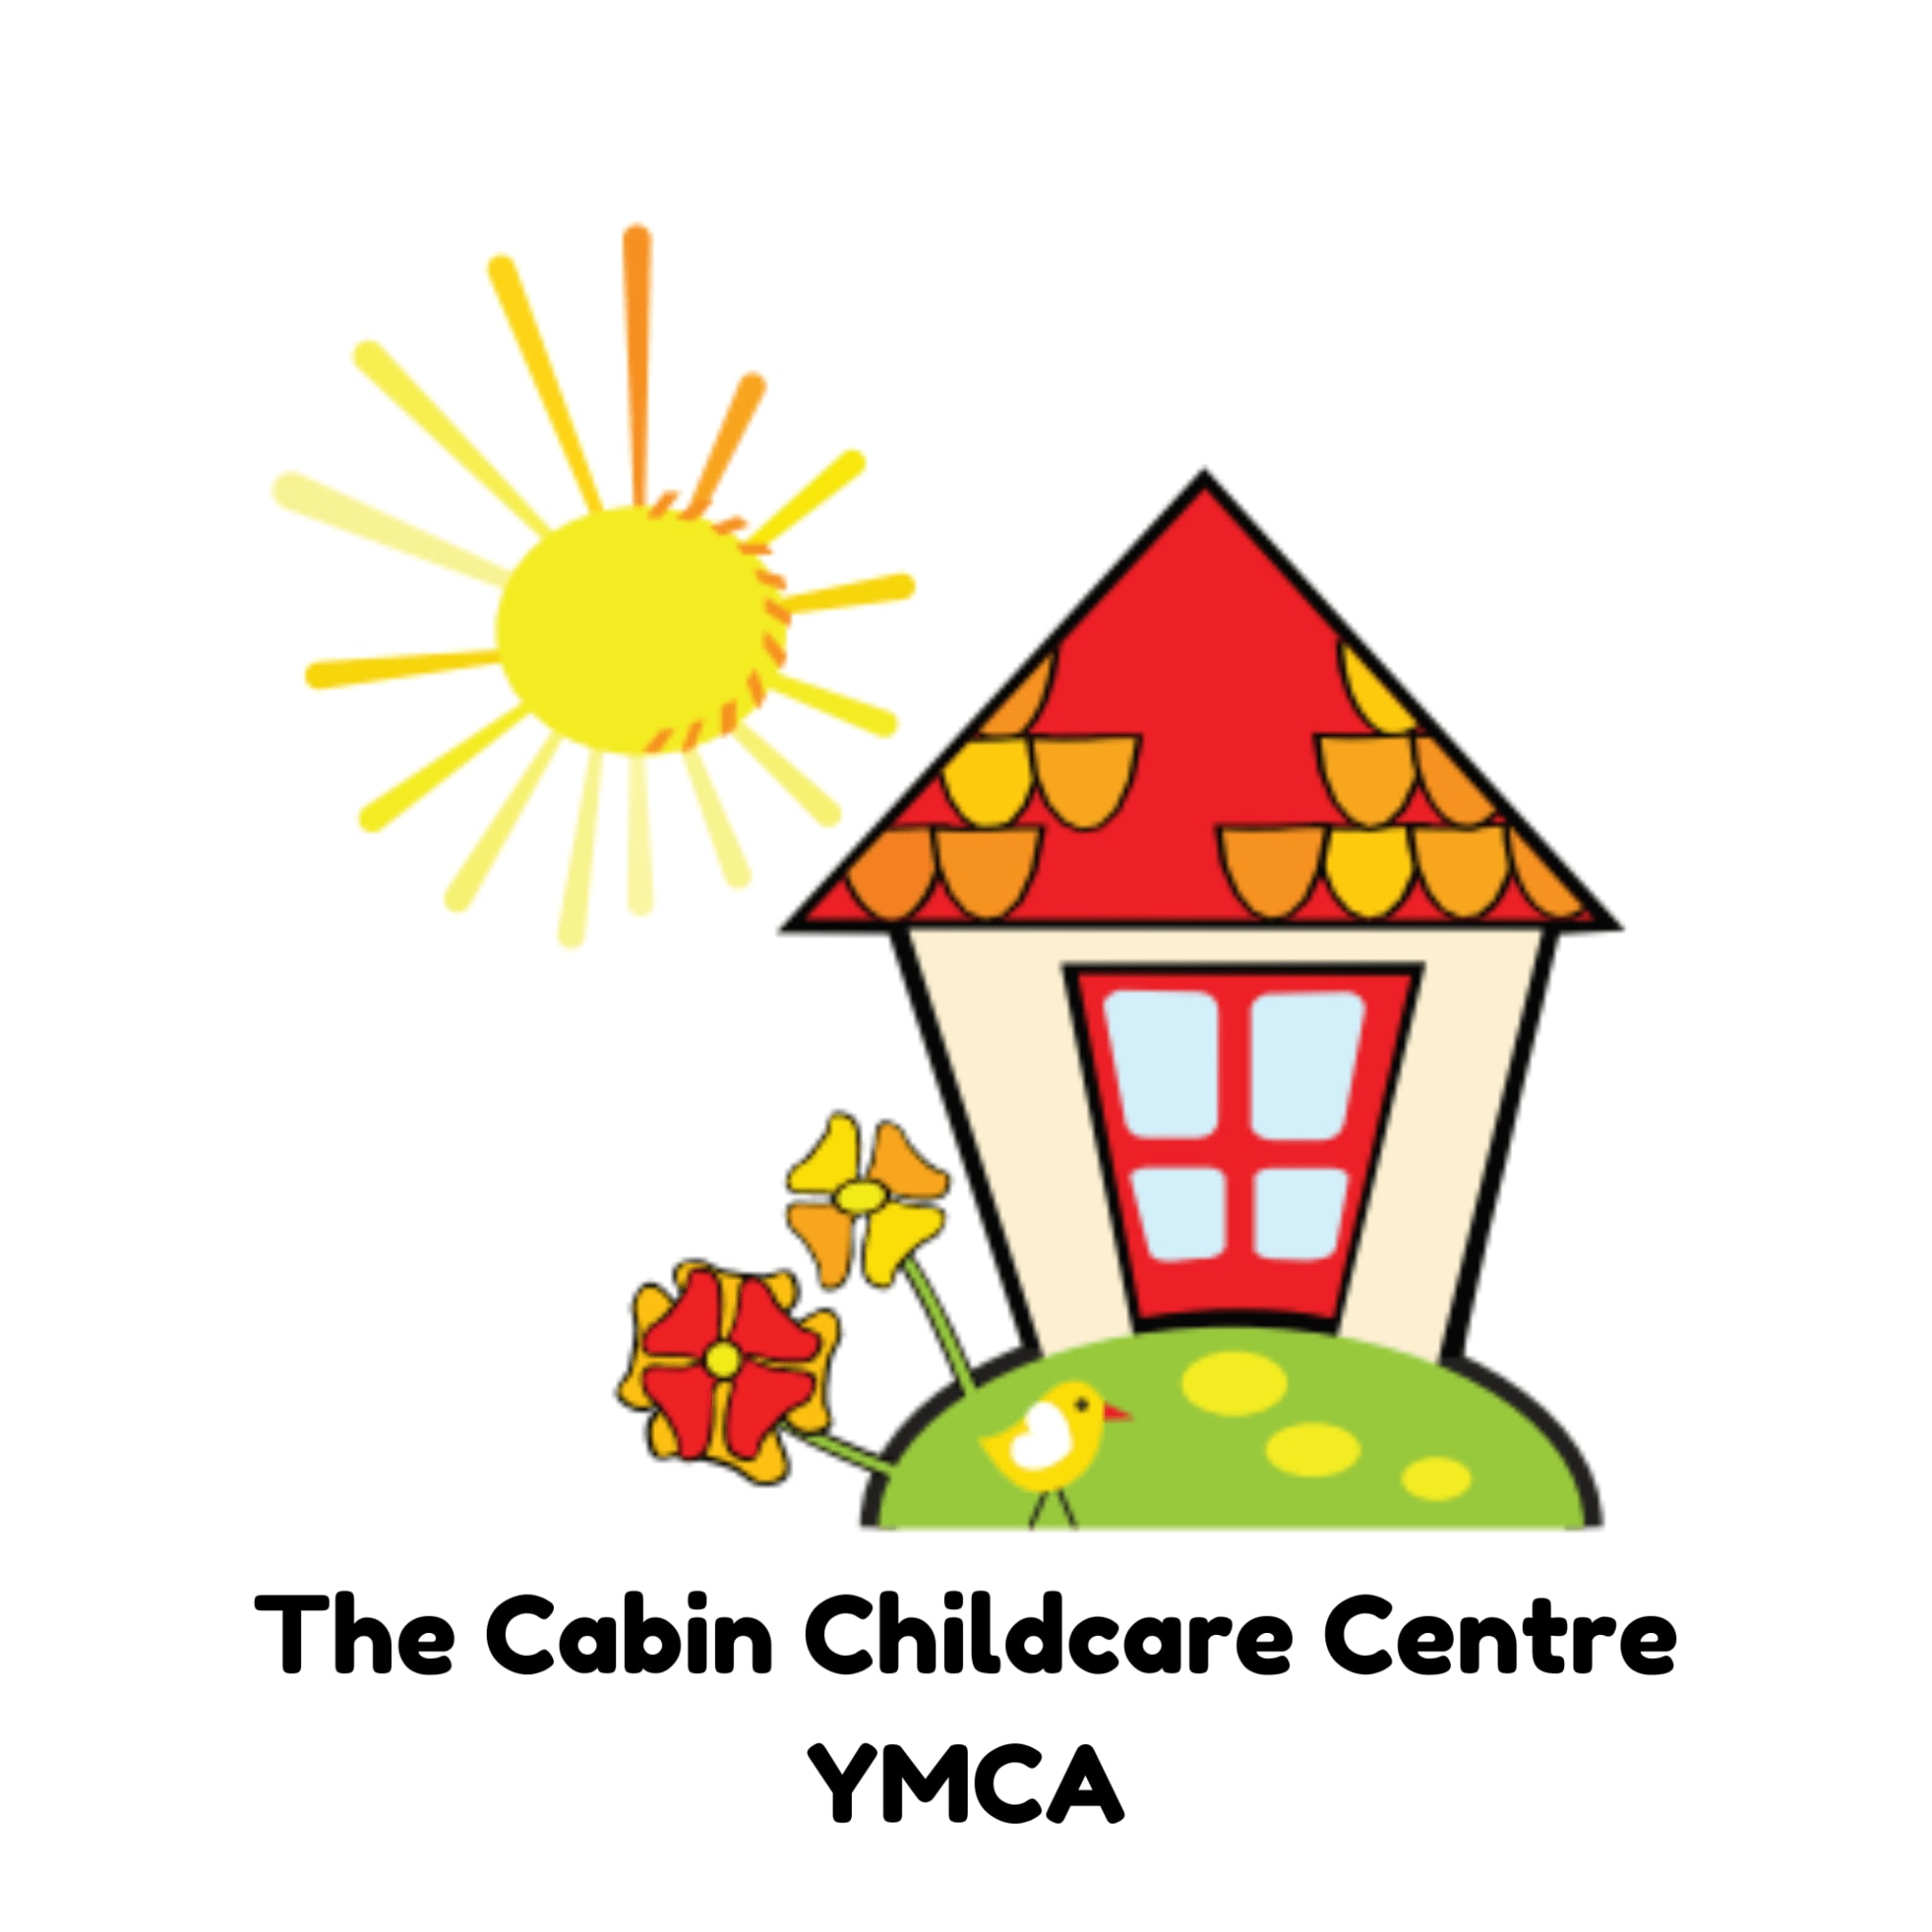 LOGO The Cabin Childcare Centre YMCA Plymouth 01752 201372